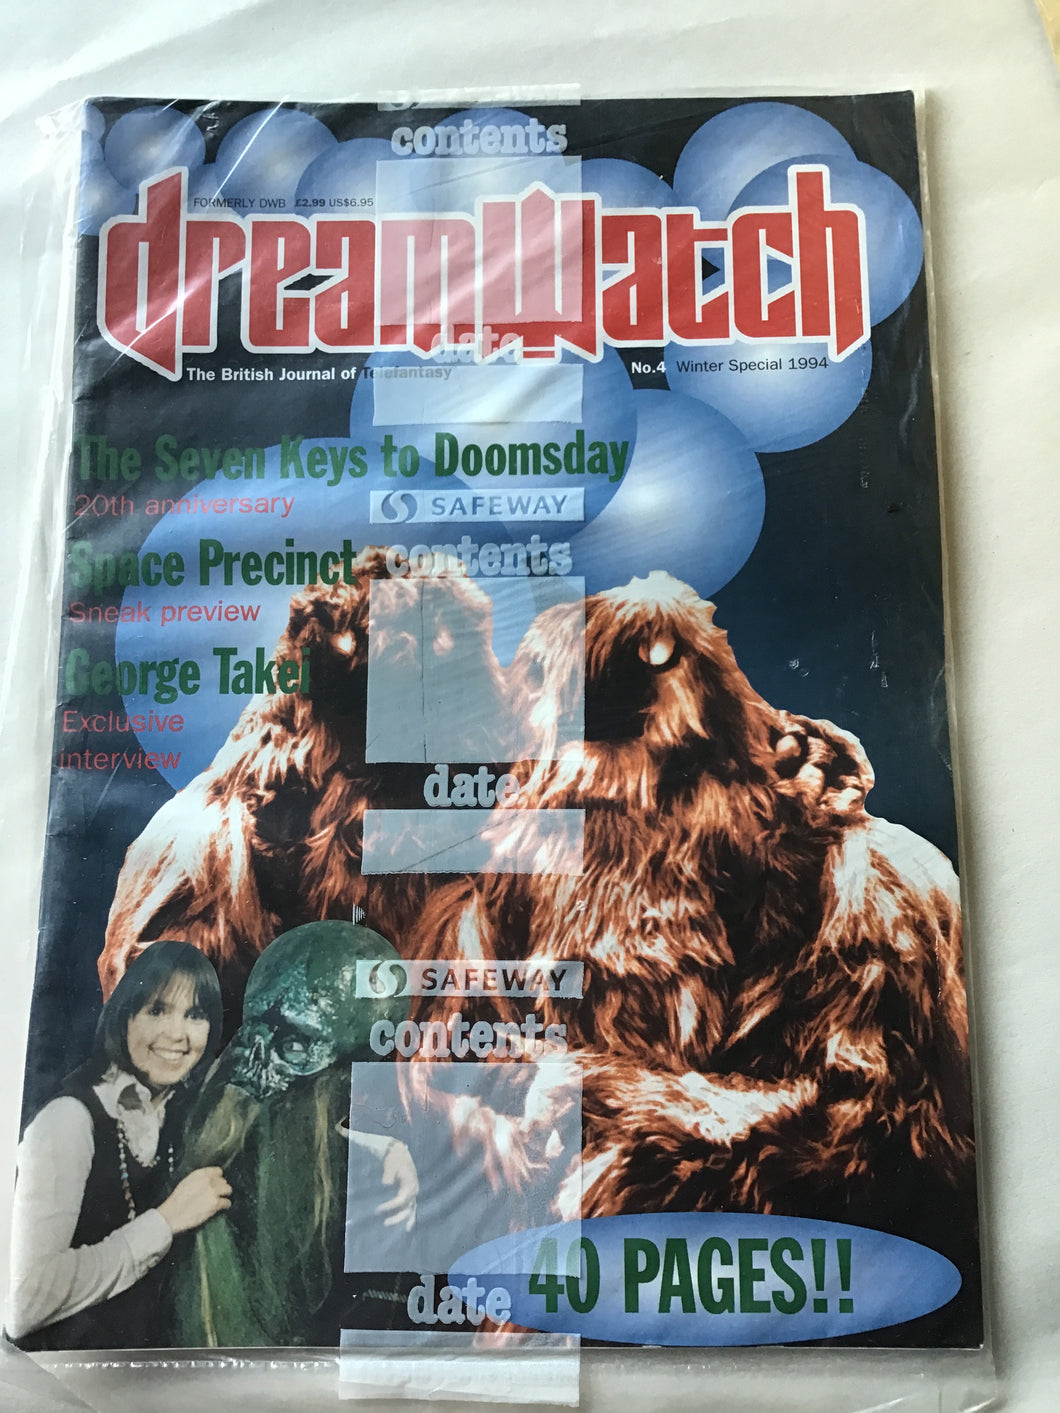 Dream watch magazine Formally DWB Winter special 1994 number 4. Space precinct George Takei interview